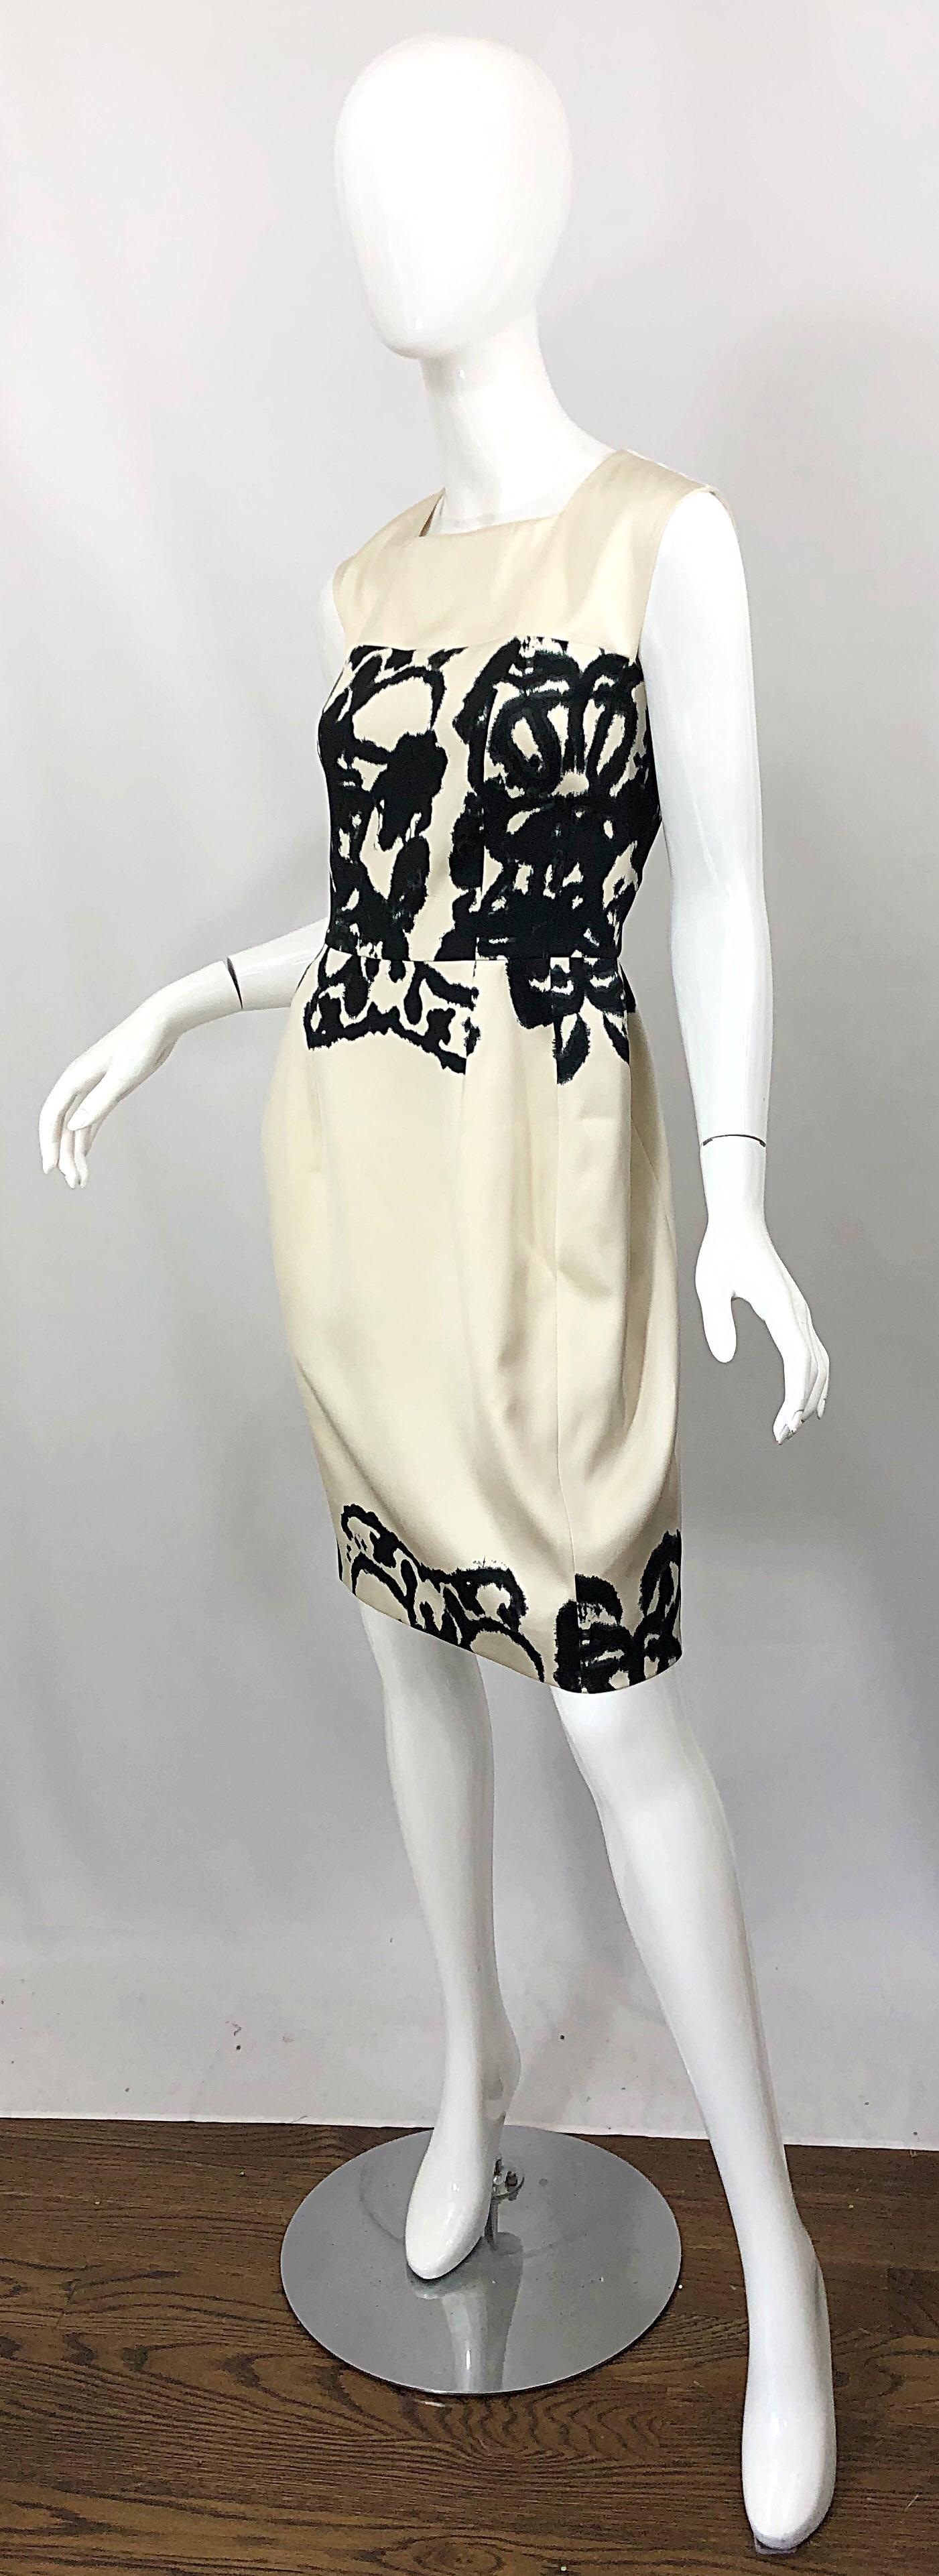 New Yves Saint Laurent Size 42 / 8-10 Ivory and Black Abstract Print Silk Dress 1